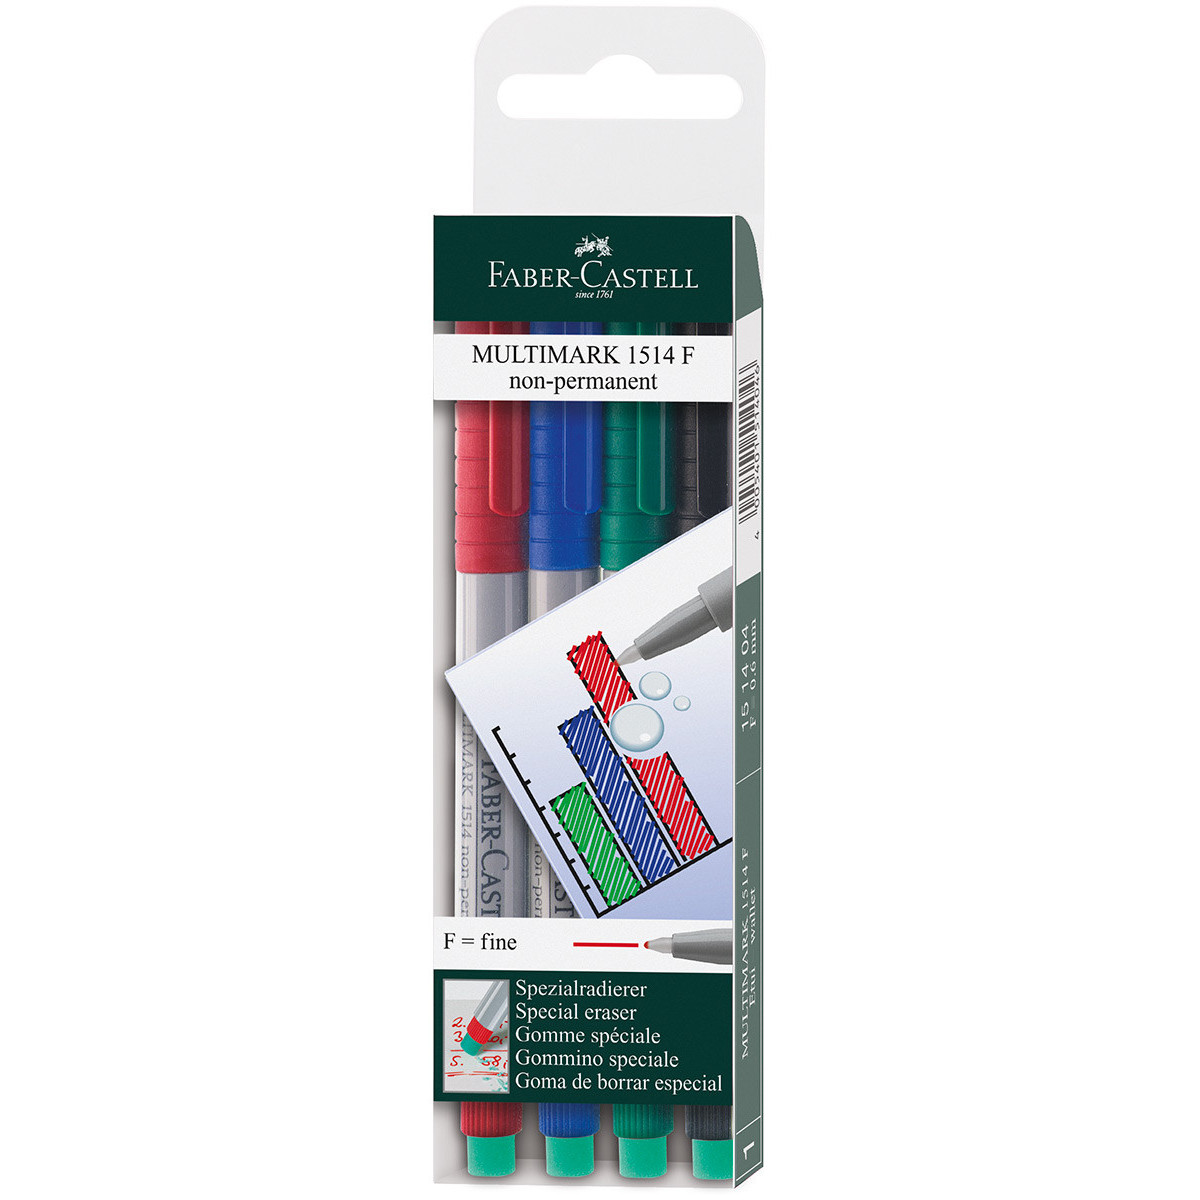 Faber-Castell Multimark Non-Permanent Marker - Fine - Assorted Colours (Pack of 4)